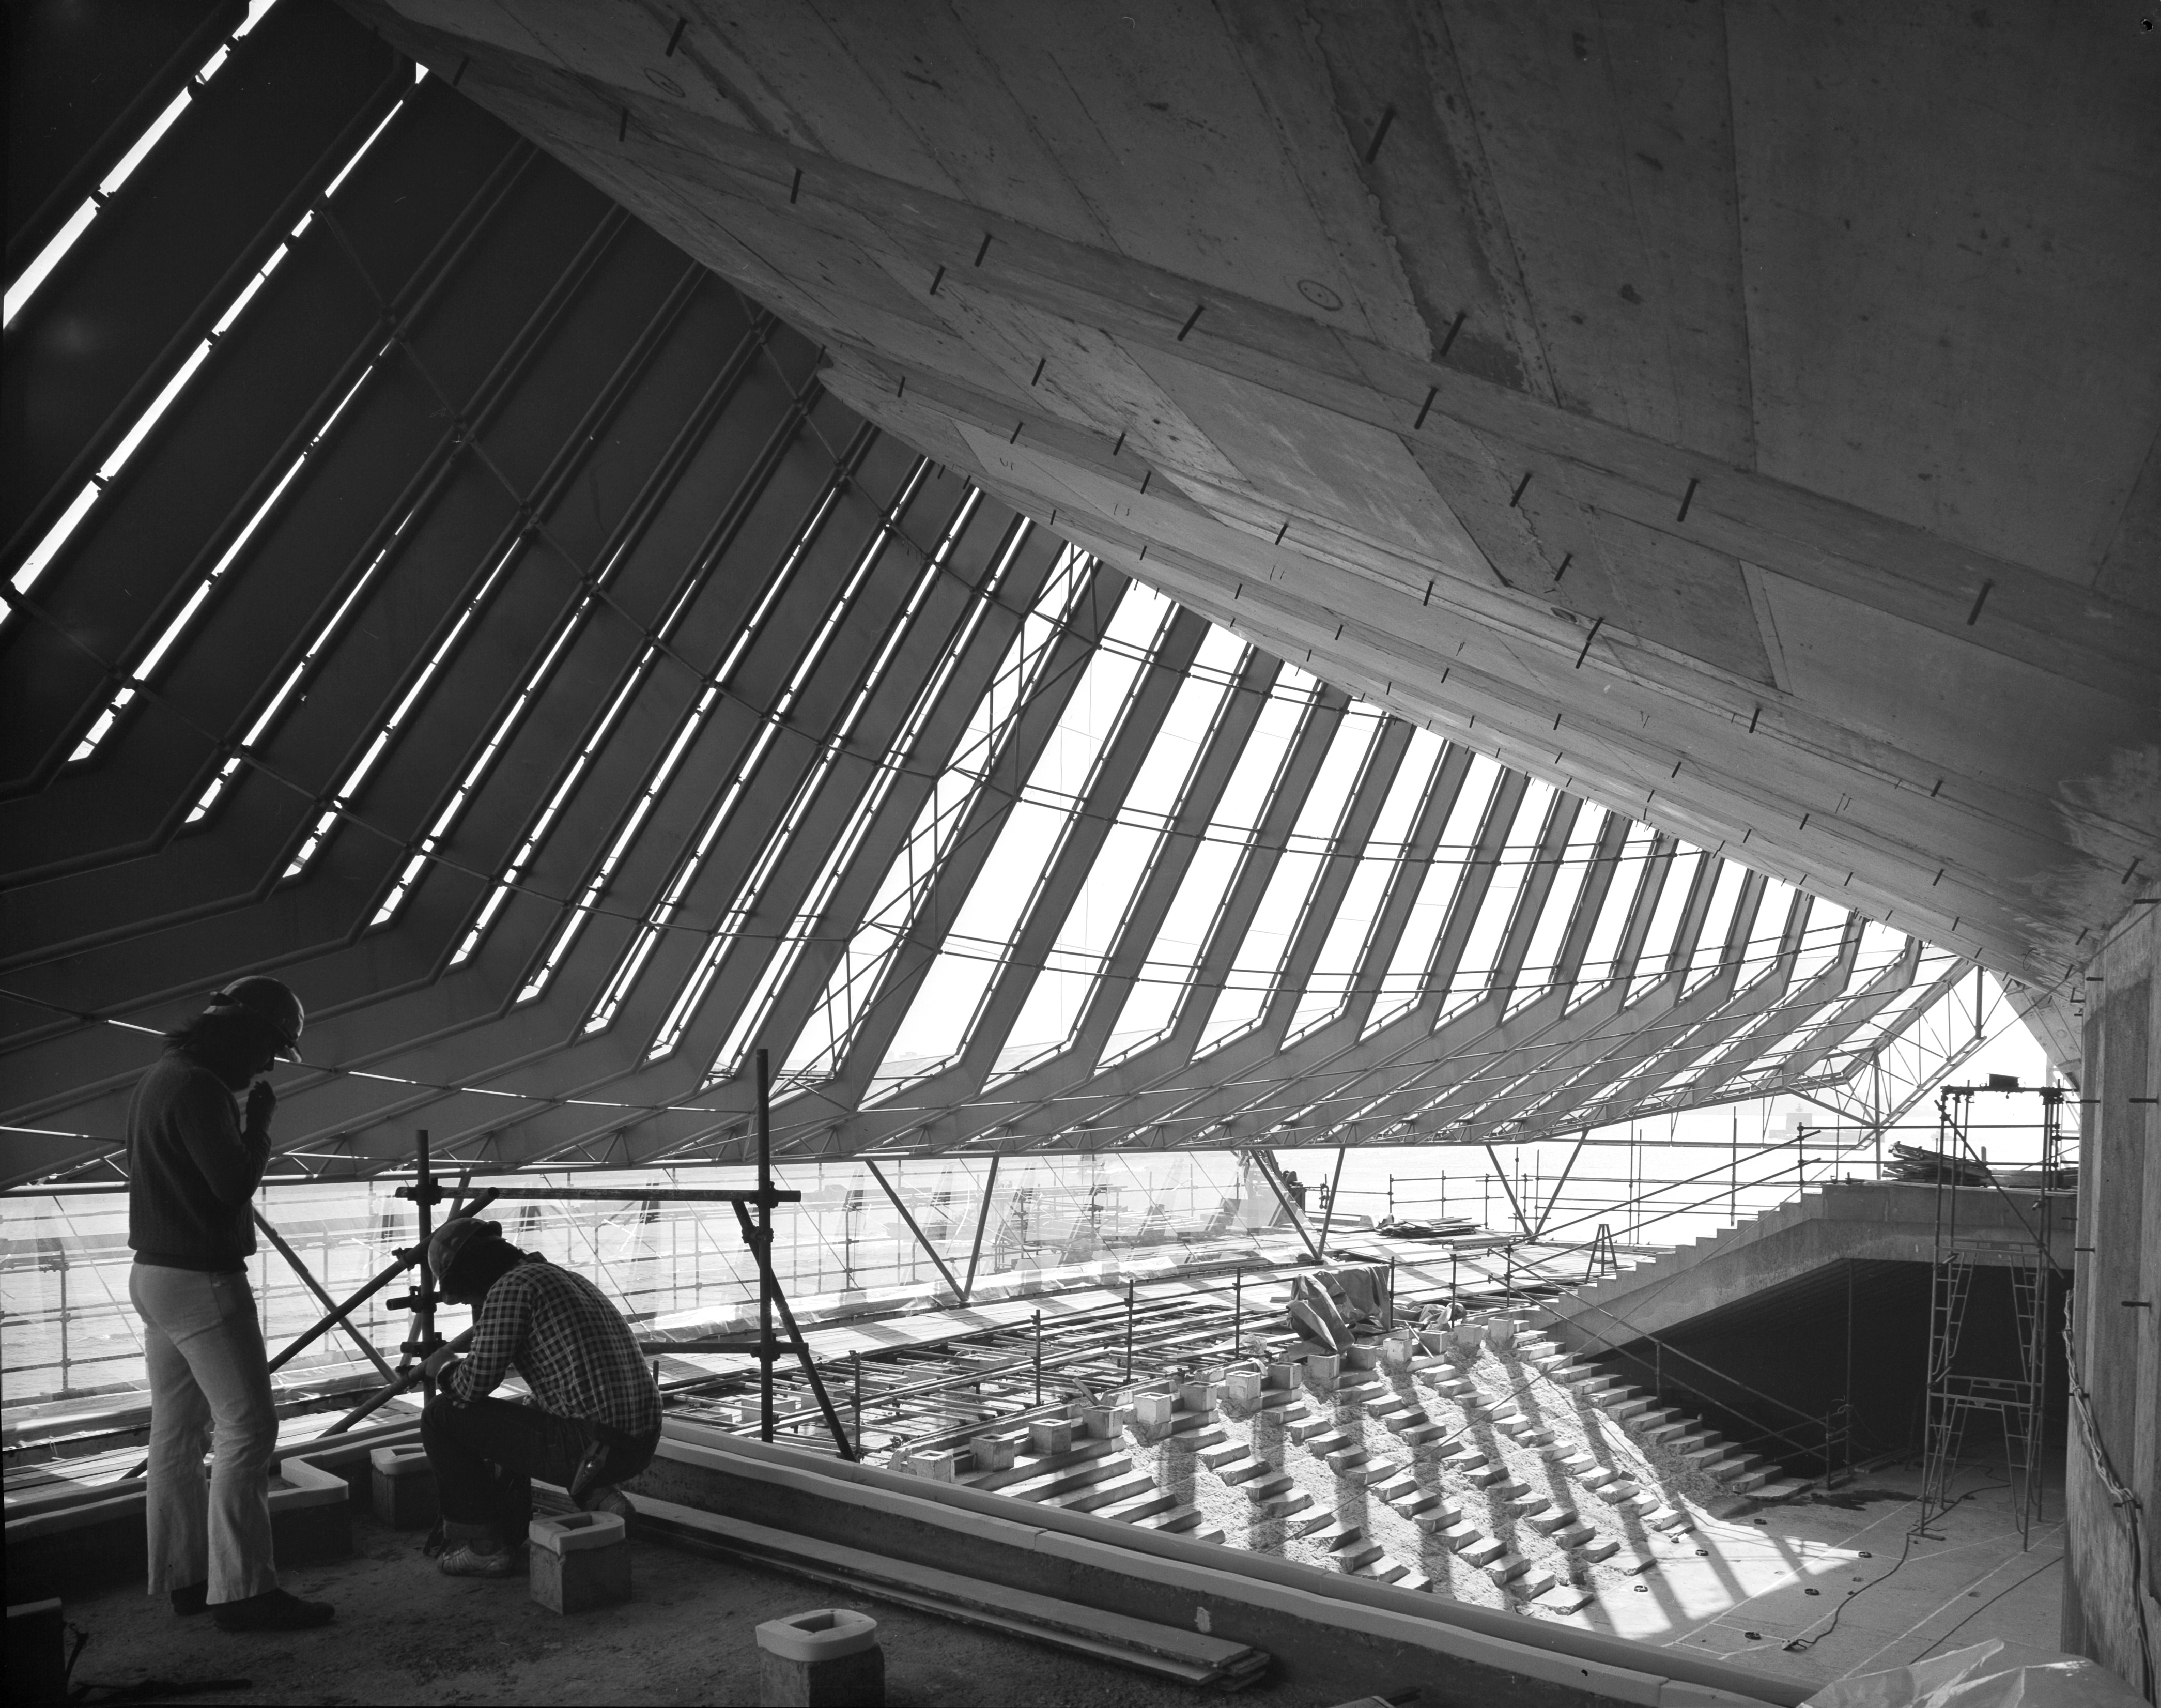 Two men working on the interior construction of the Sydney Opera House.